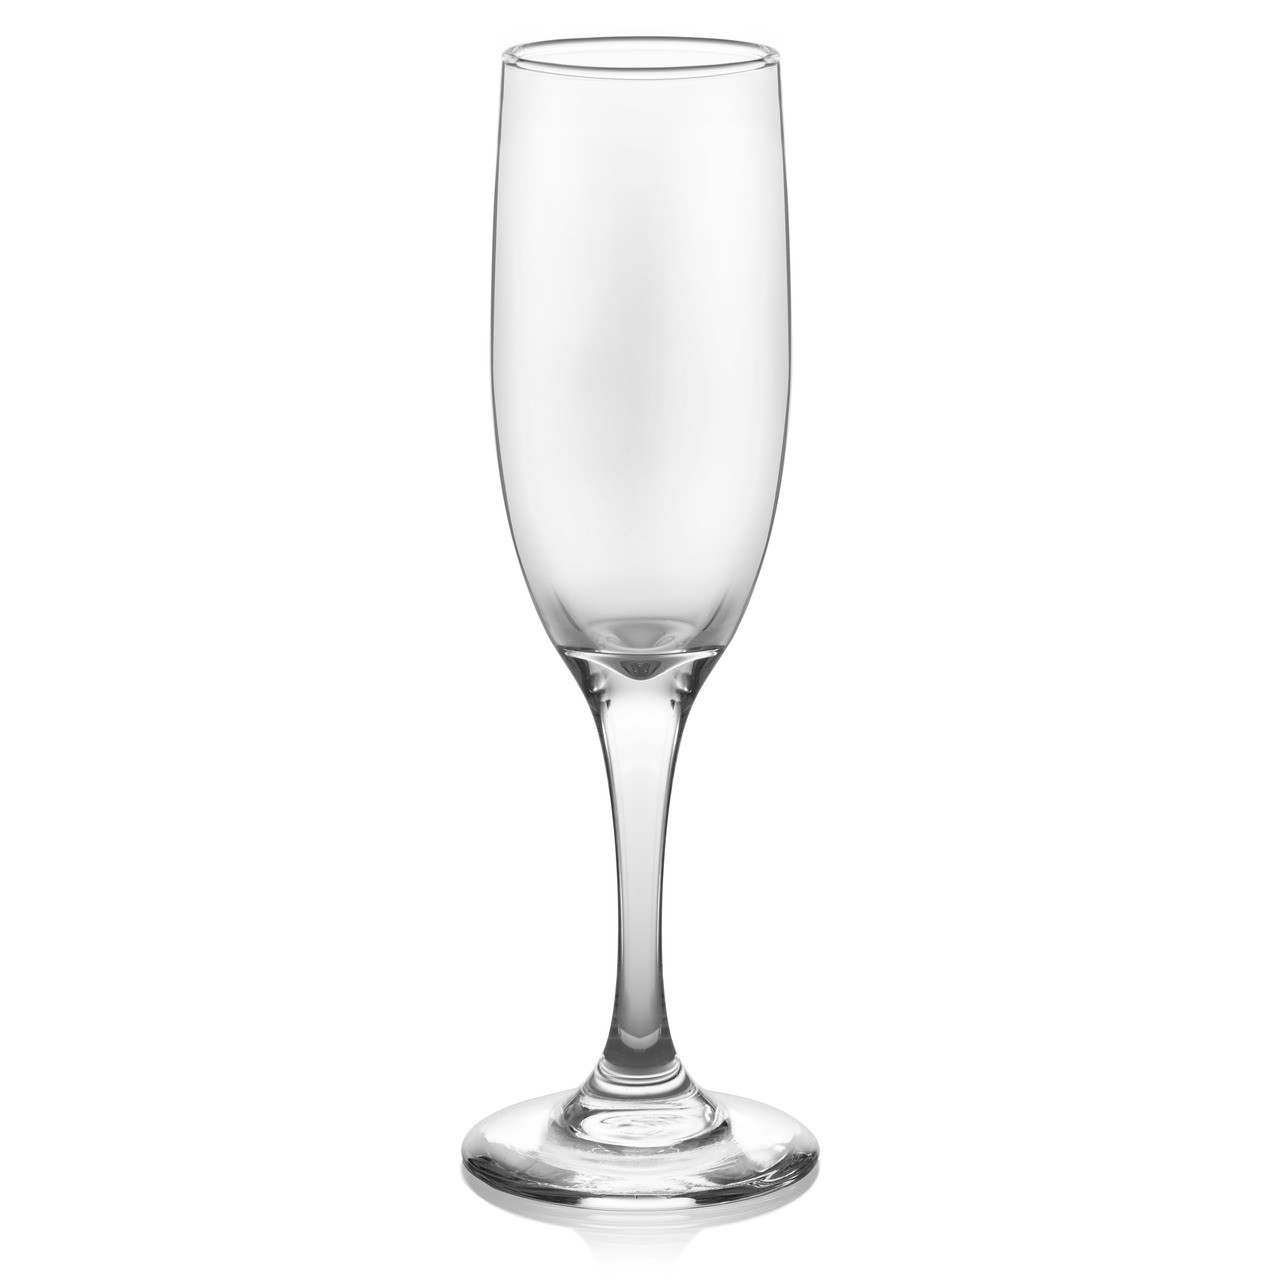 Libbey Stemless Champagne Flute Glasses, 8.5-ounce, Set of 12